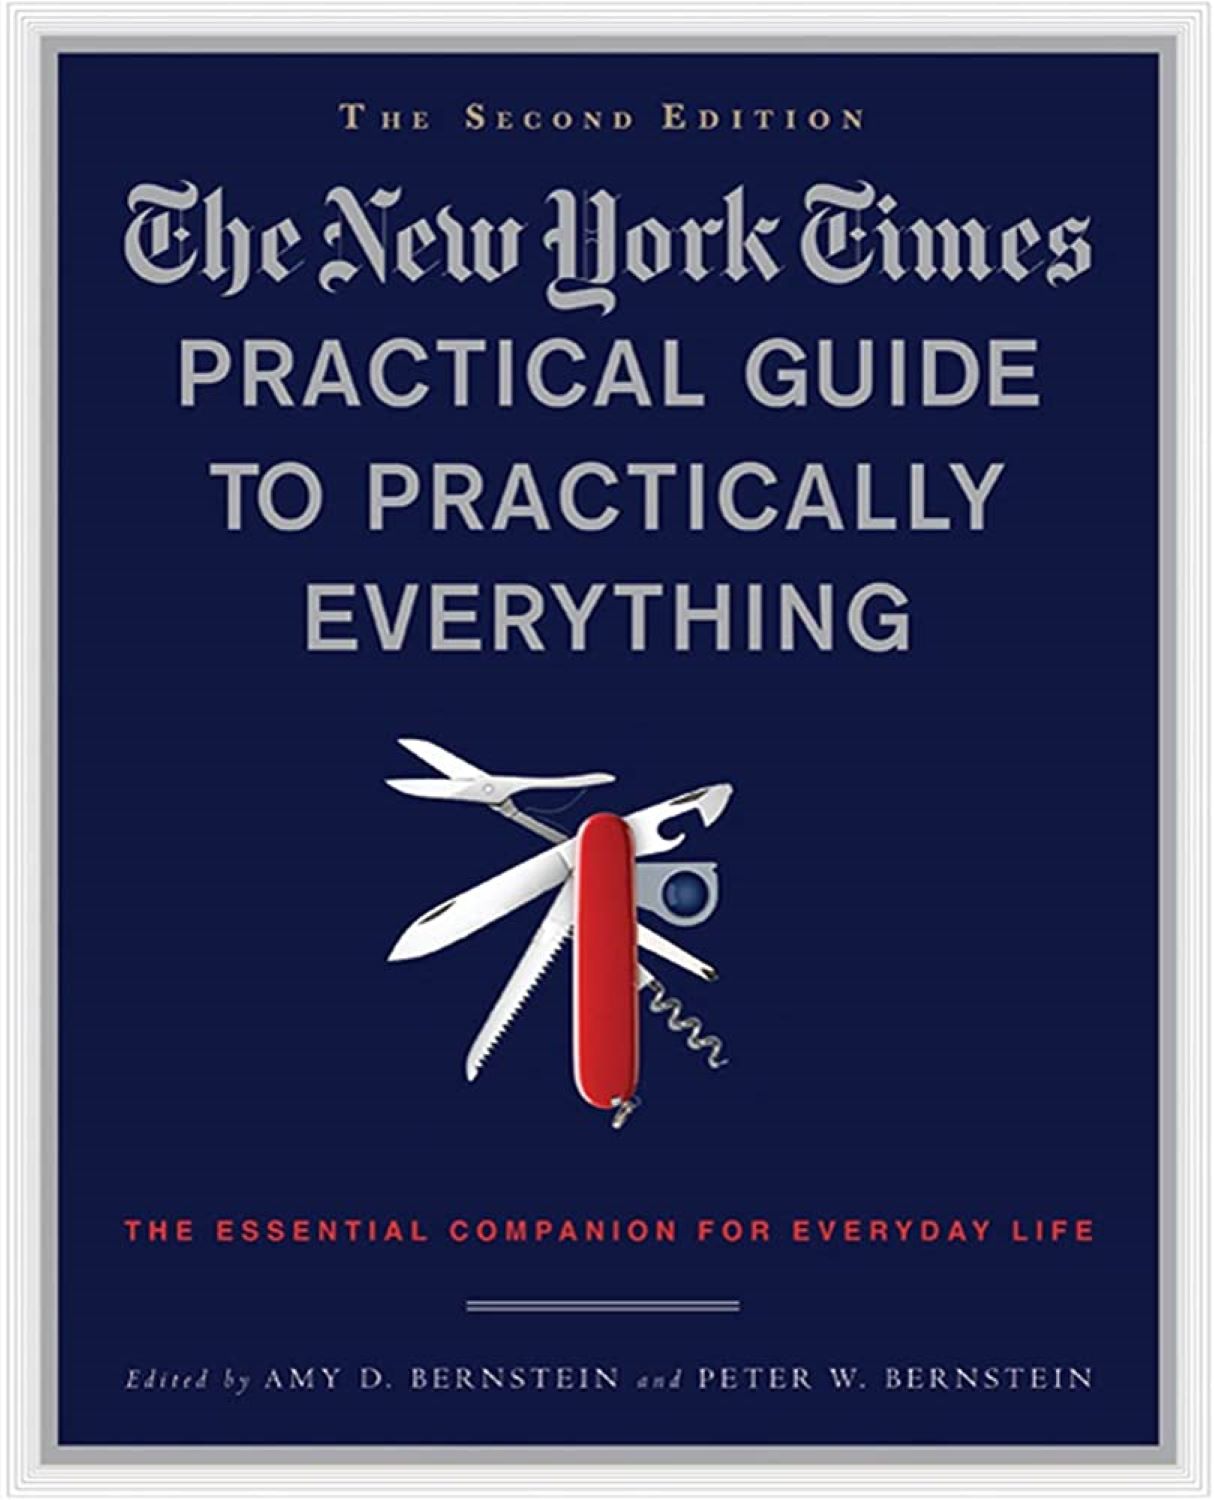 The New York Times Practical Guide to Practically Everything, Second Edition - The Essential Companion for Everyday Life by Peter Bernstein and Amy Bernstein